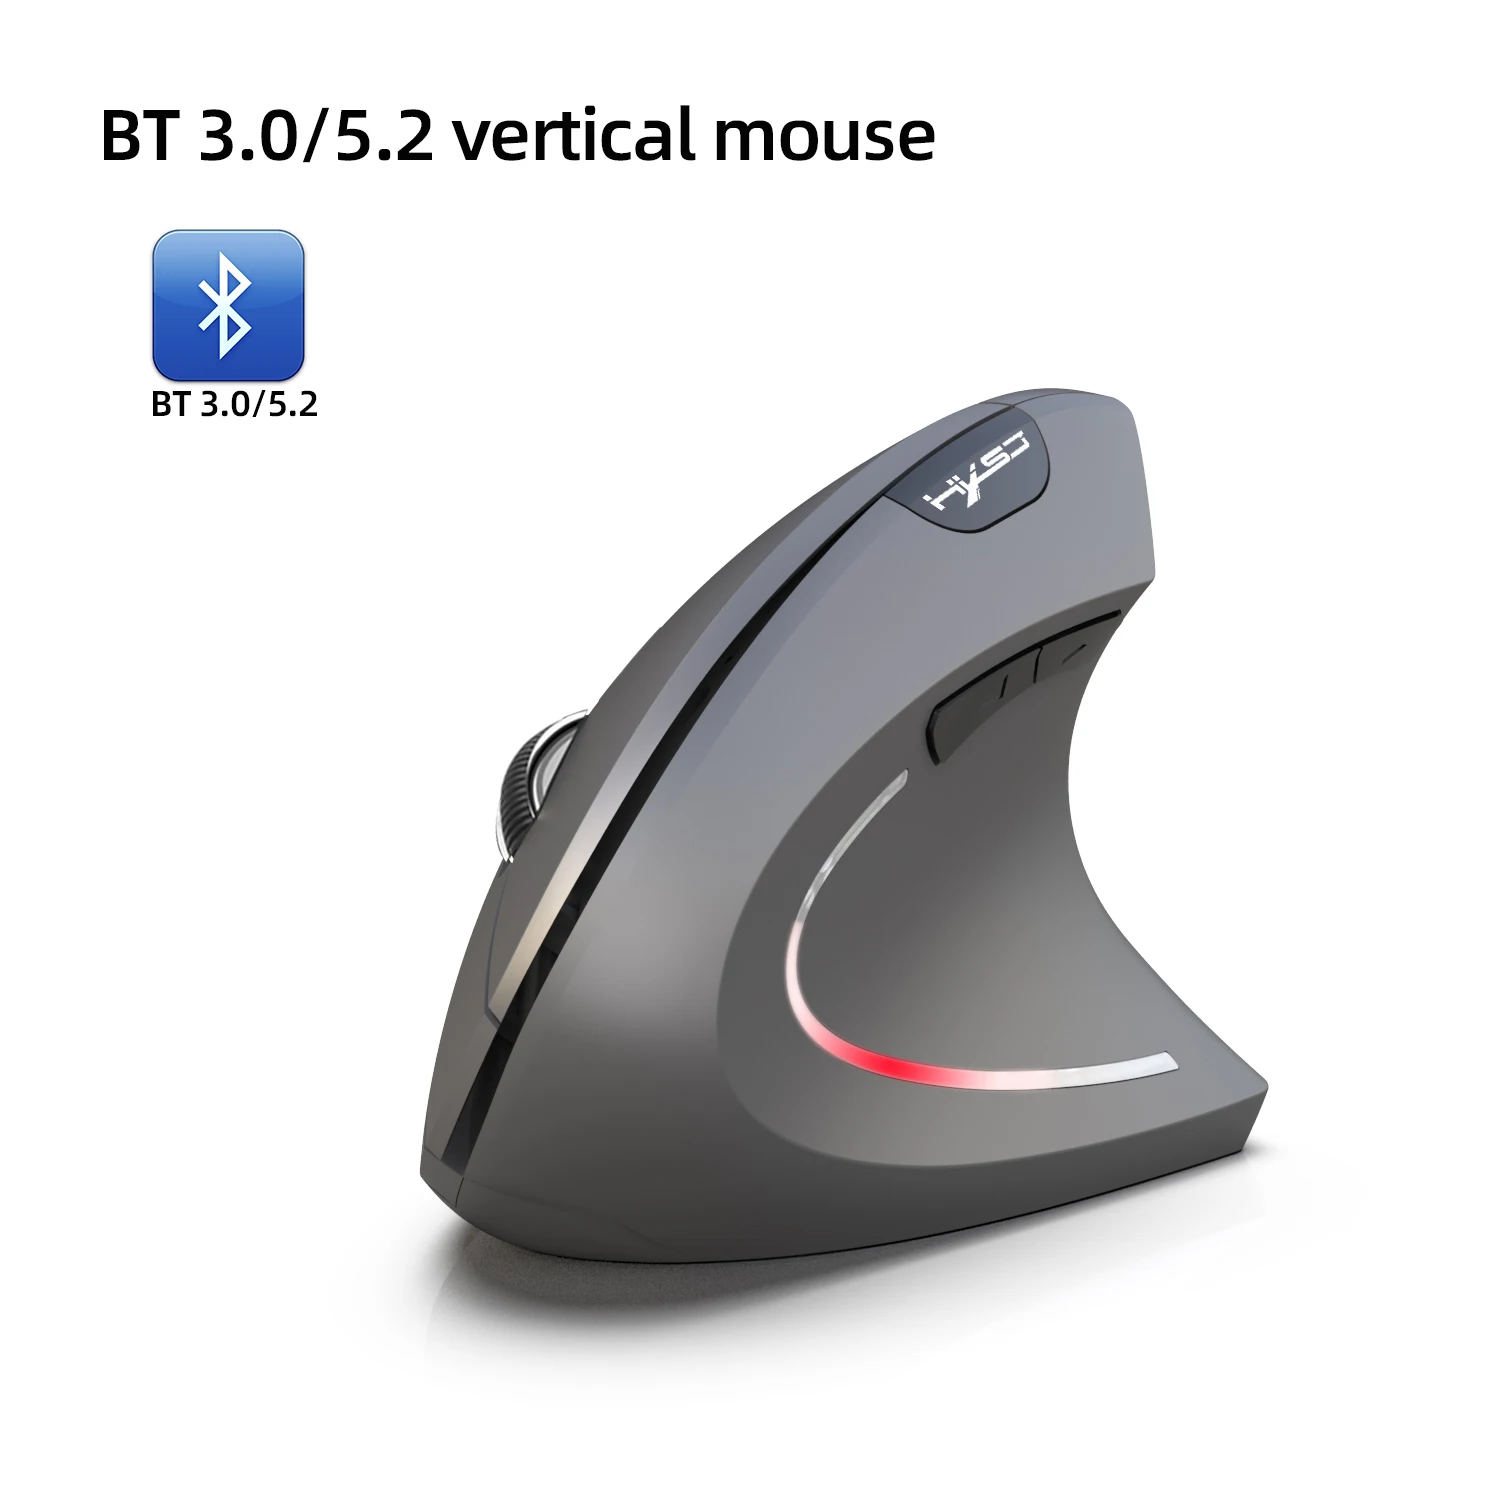 

HXSJ Wireless Mouse Bluetooth 3.0/5.2 Dual Modes USB Gaming Mouse Ergonomic Rechargeable Silent Click Vertical Mice For Computer